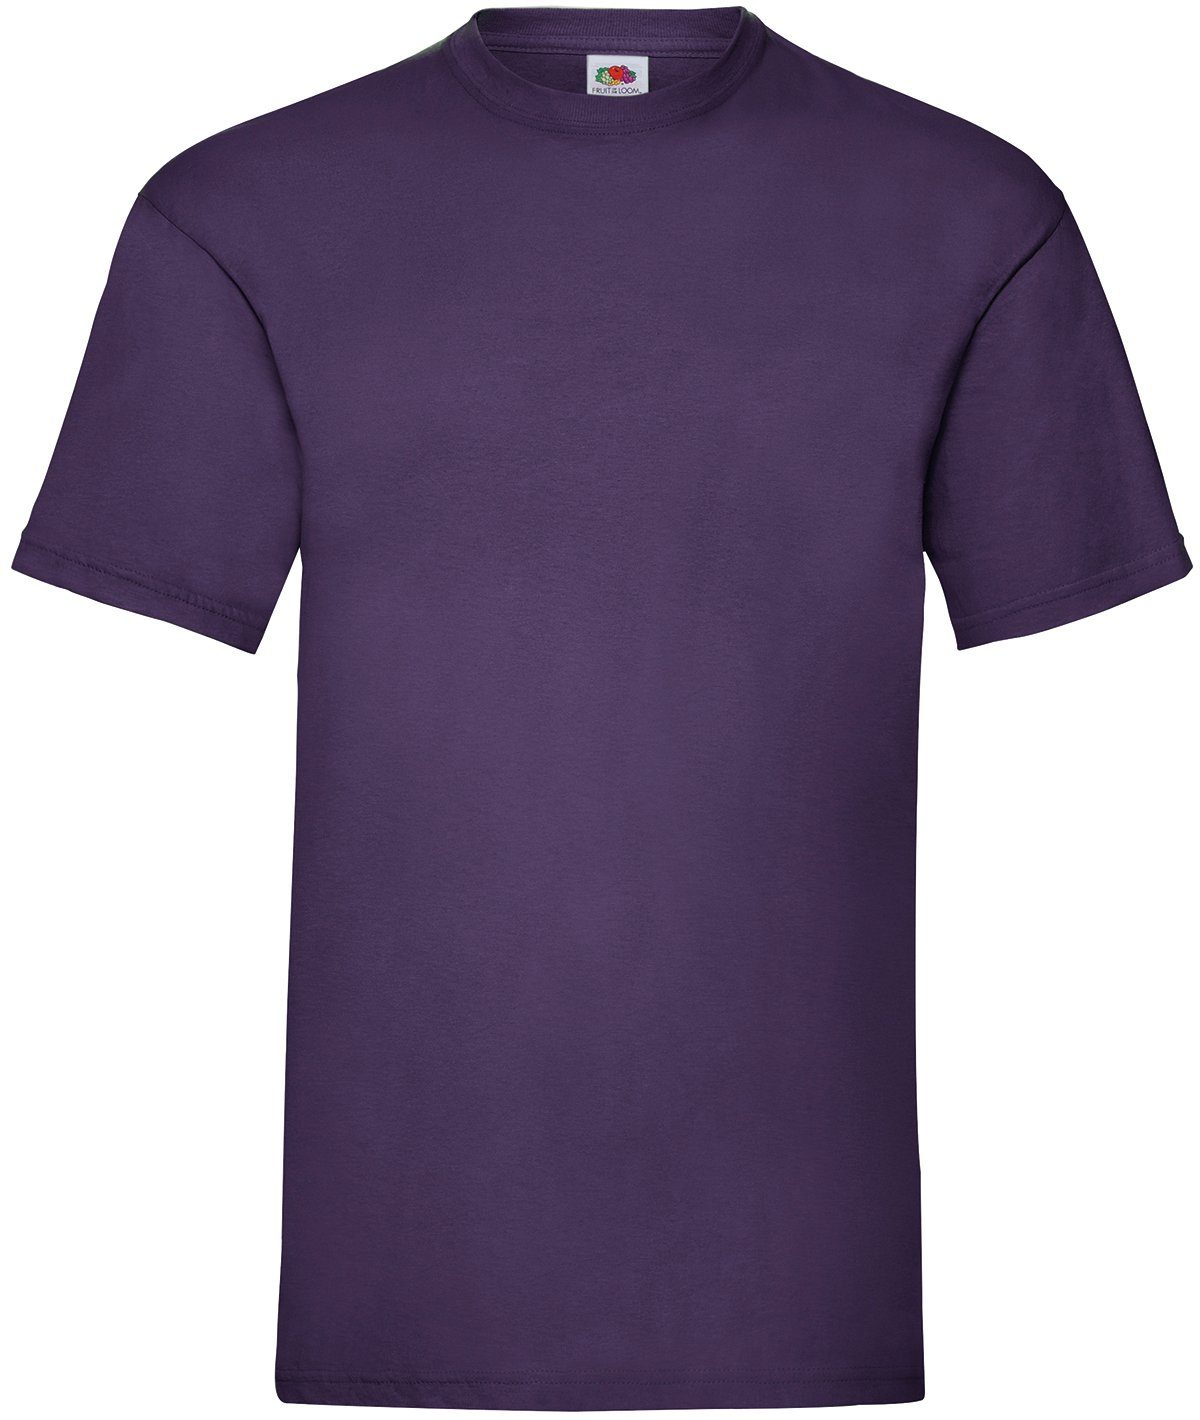 Fruit of the Loom Rundhalsshirt Fruit of the Loom Valueweight T violett